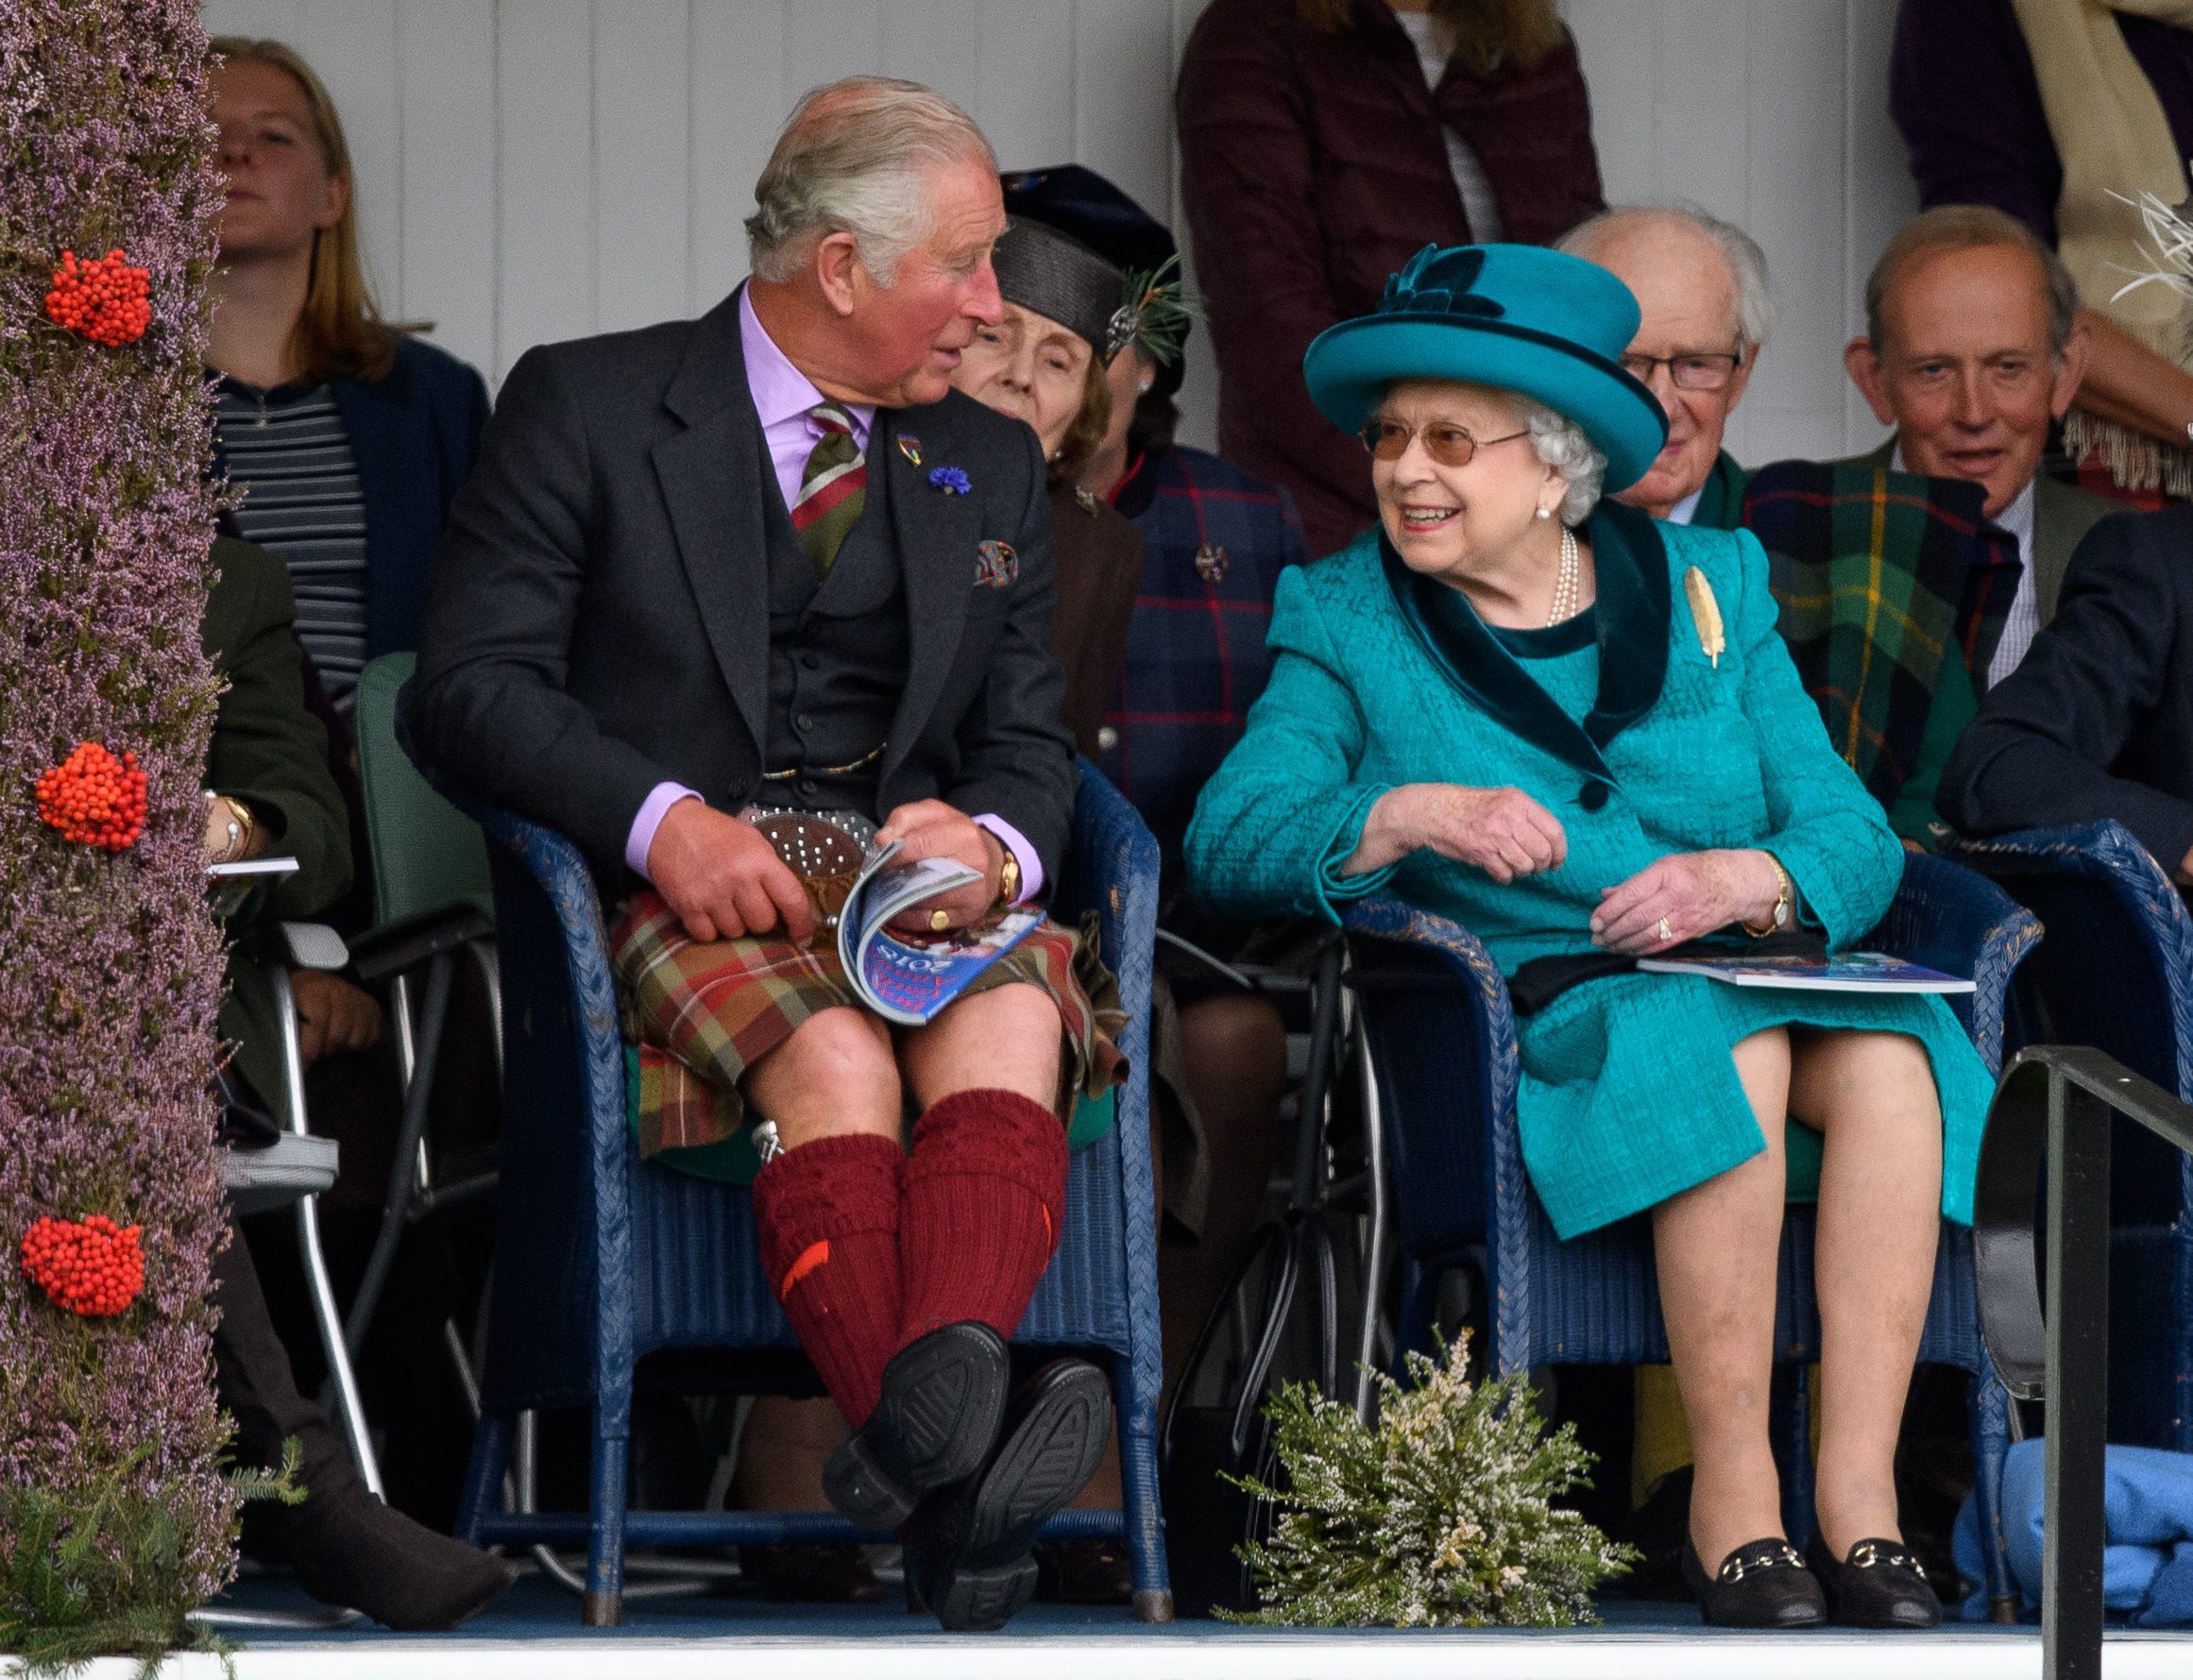 <p>Prince Charles joined his mother, Queen Elizabeth II, at the Braemar Highland Gathering in Scotland on Sept. 1, 2018.</p>